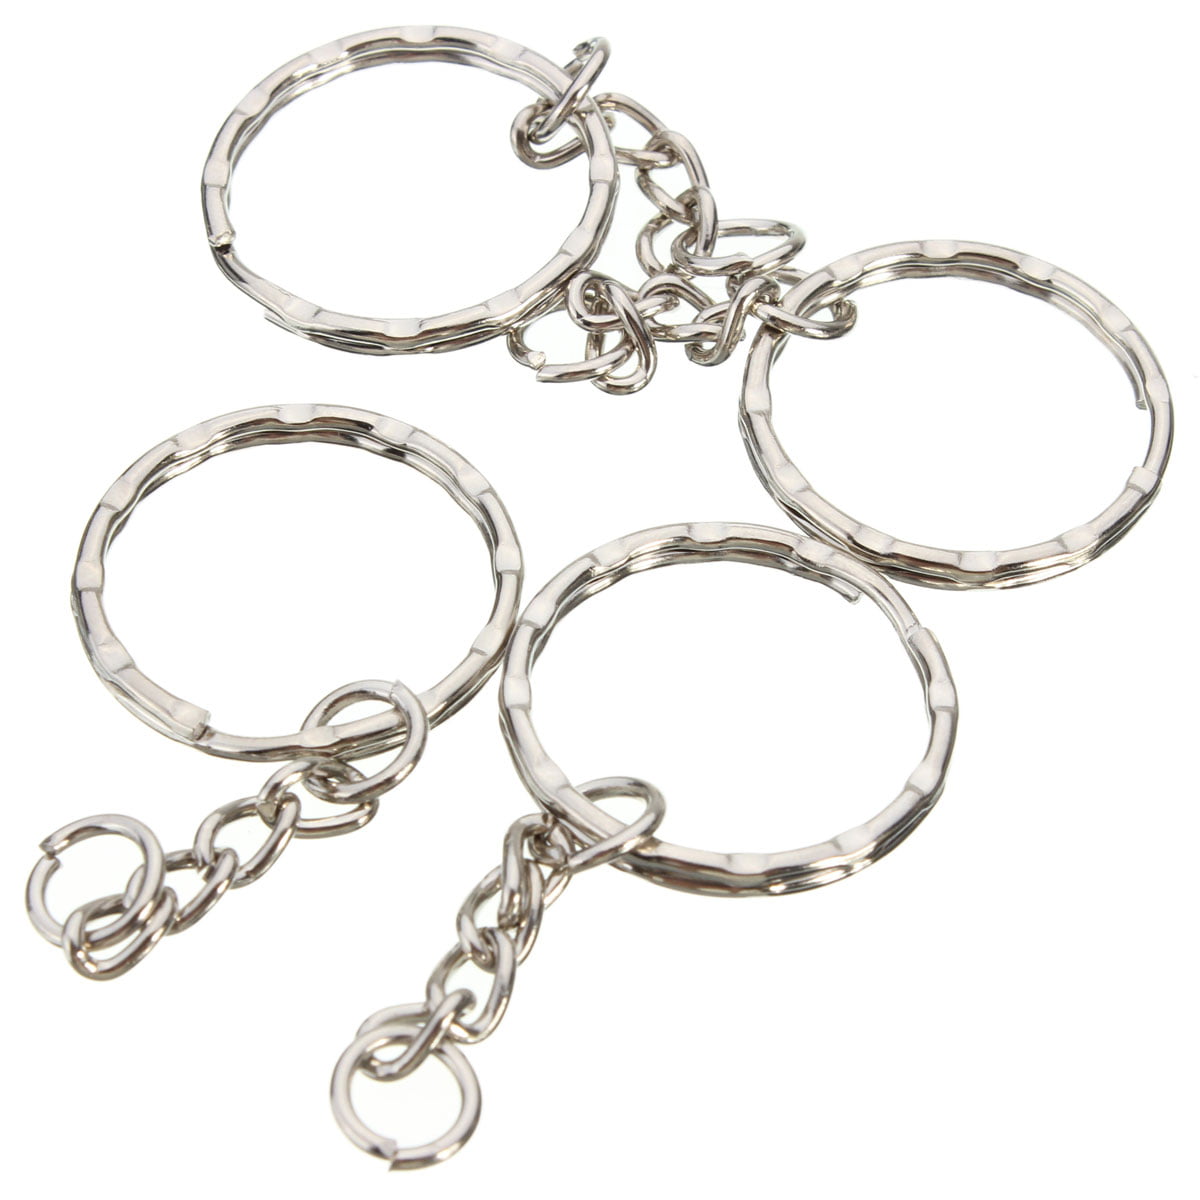 Details about   50/300pcs Silver Keyring Blanks Tone Key Chains Split Rings For Link Chain 